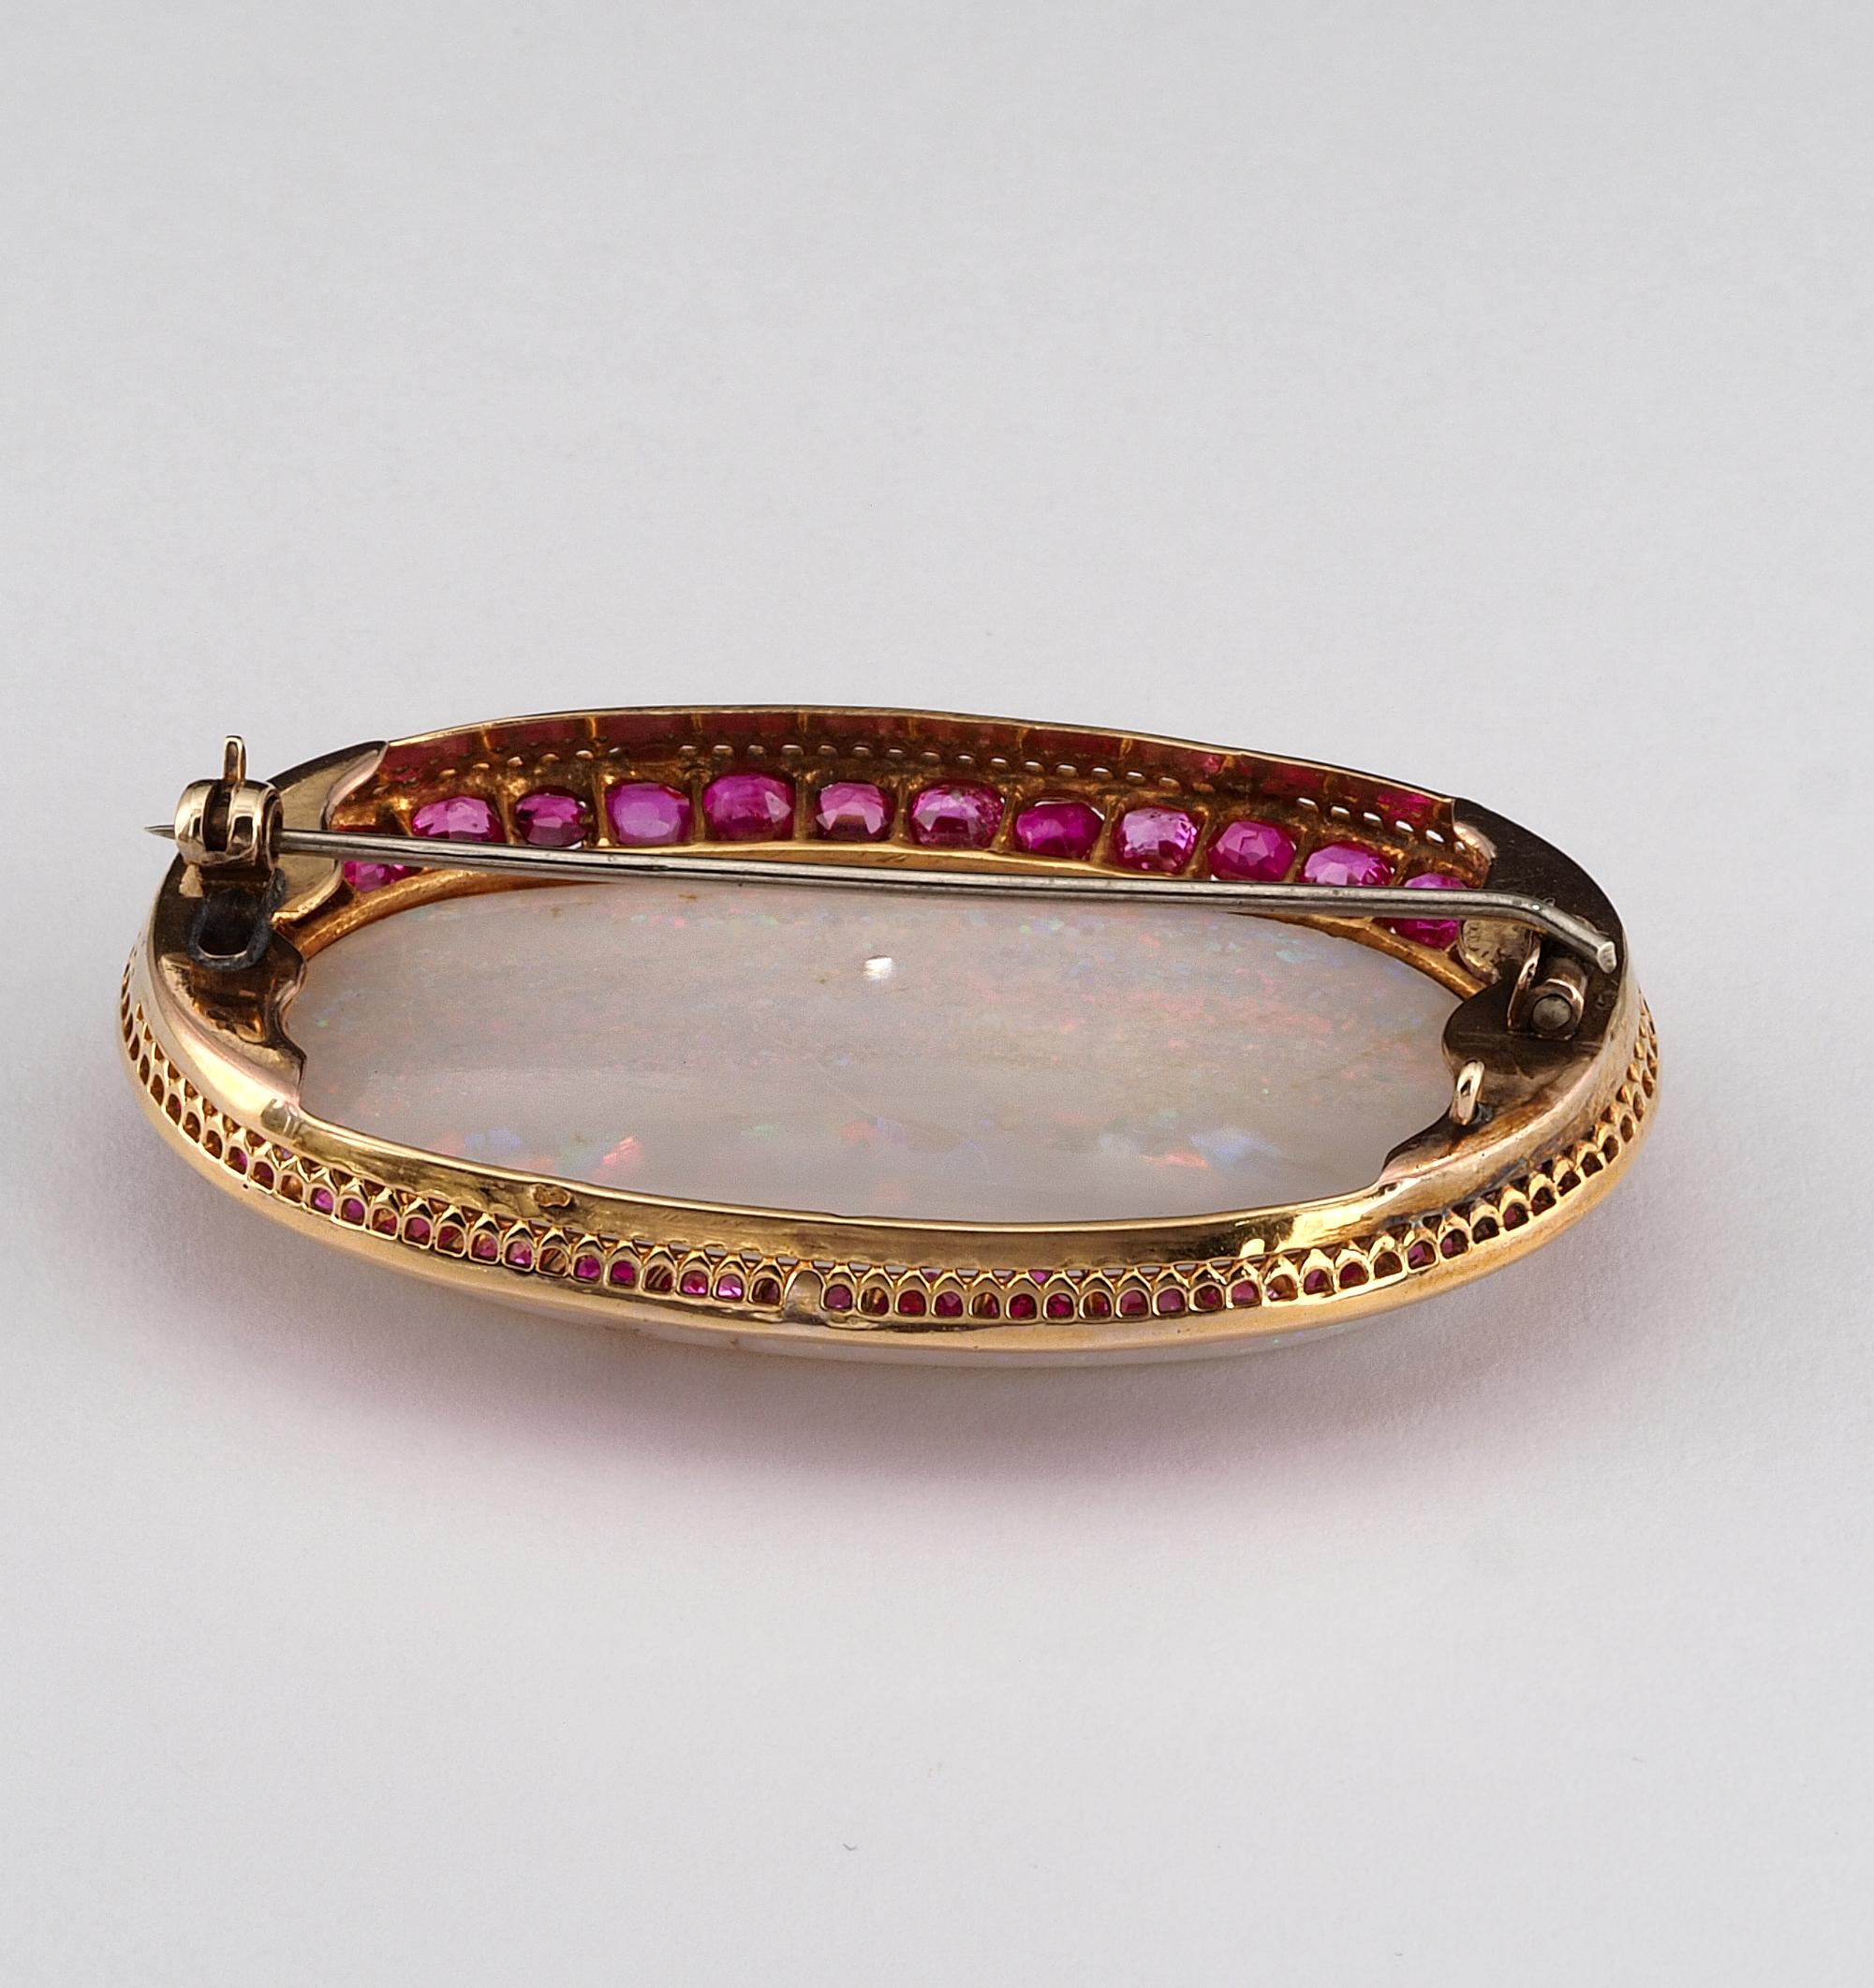 French Victorian 39.00 Ct Australian Opal 6.00 Ct Rubies Large Brooch For Sale 2